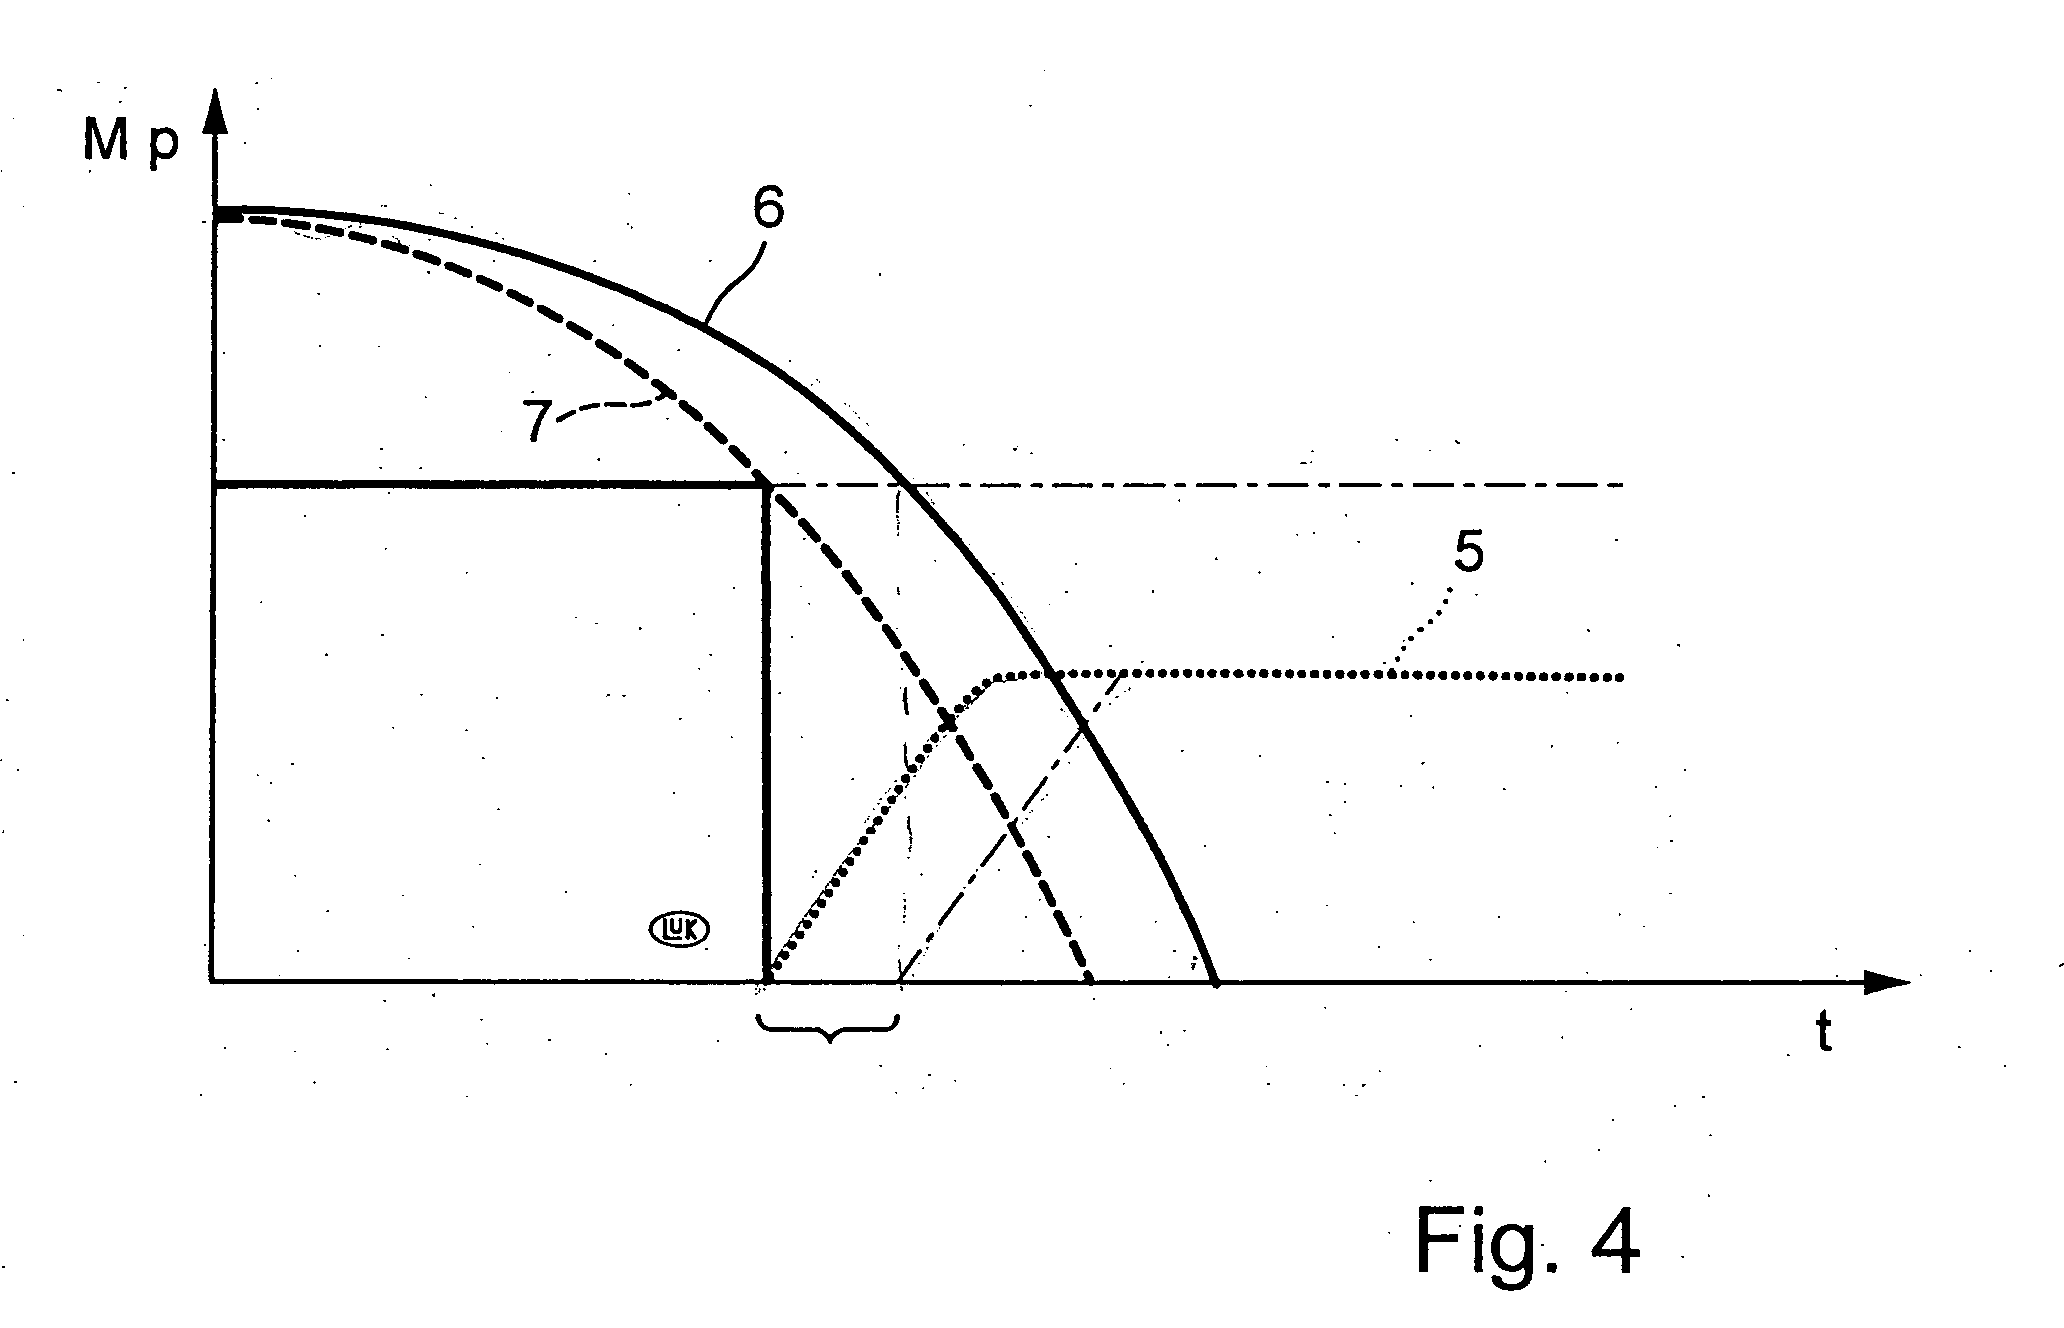 Method for changing the clutch torque in a clutch in the power train of a vehicle having an automated manual shift transmission